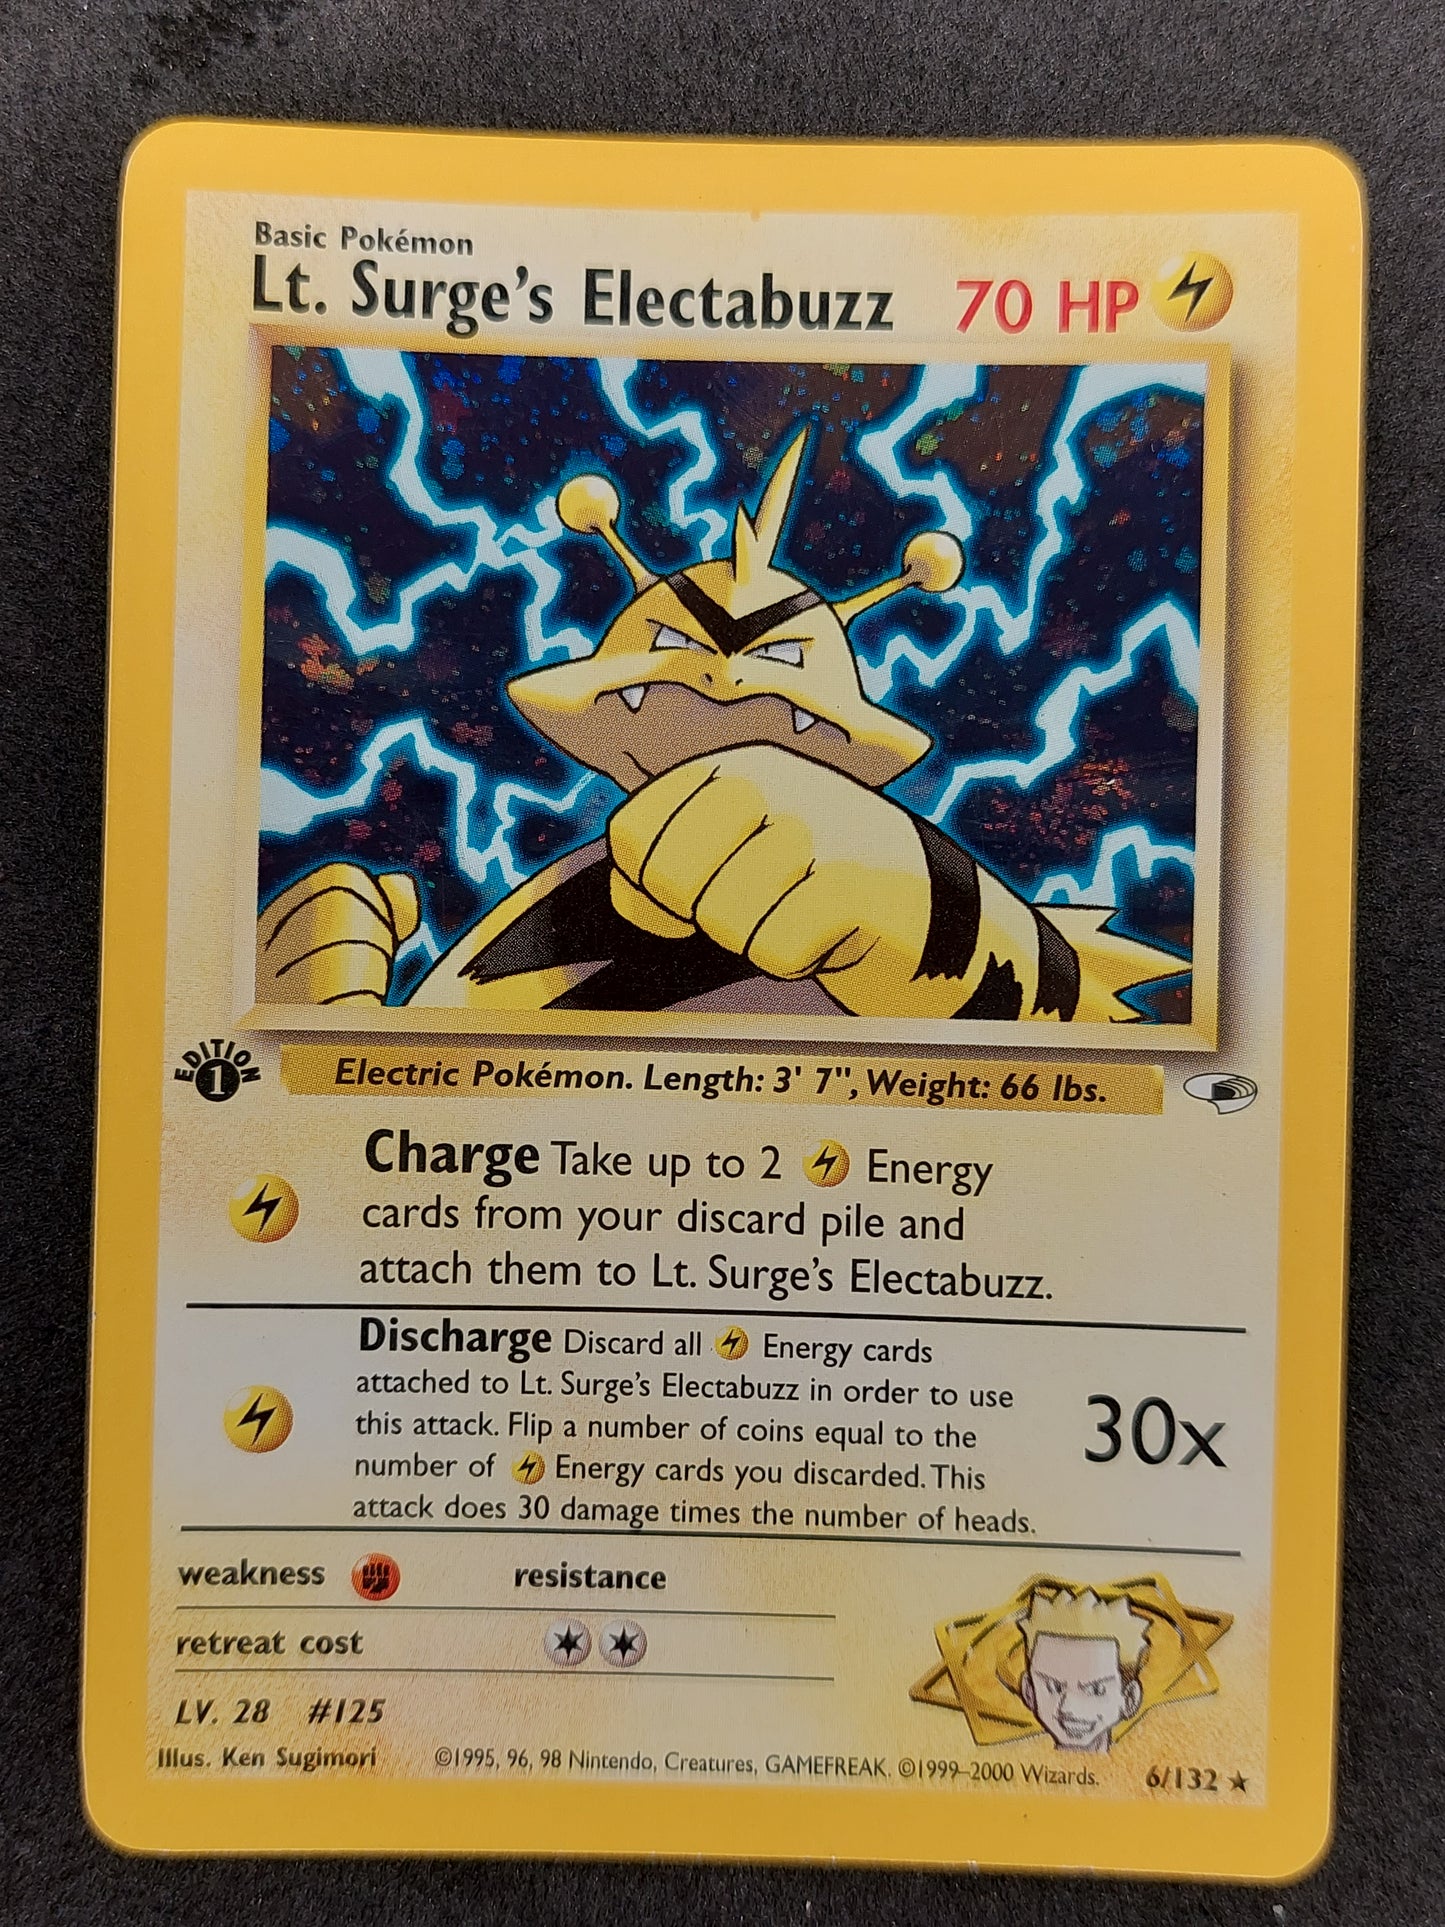 2000 Pokemon Gym Heroes 6/132 Lt. Surge's Electabuzz Holo 1st Edition LP